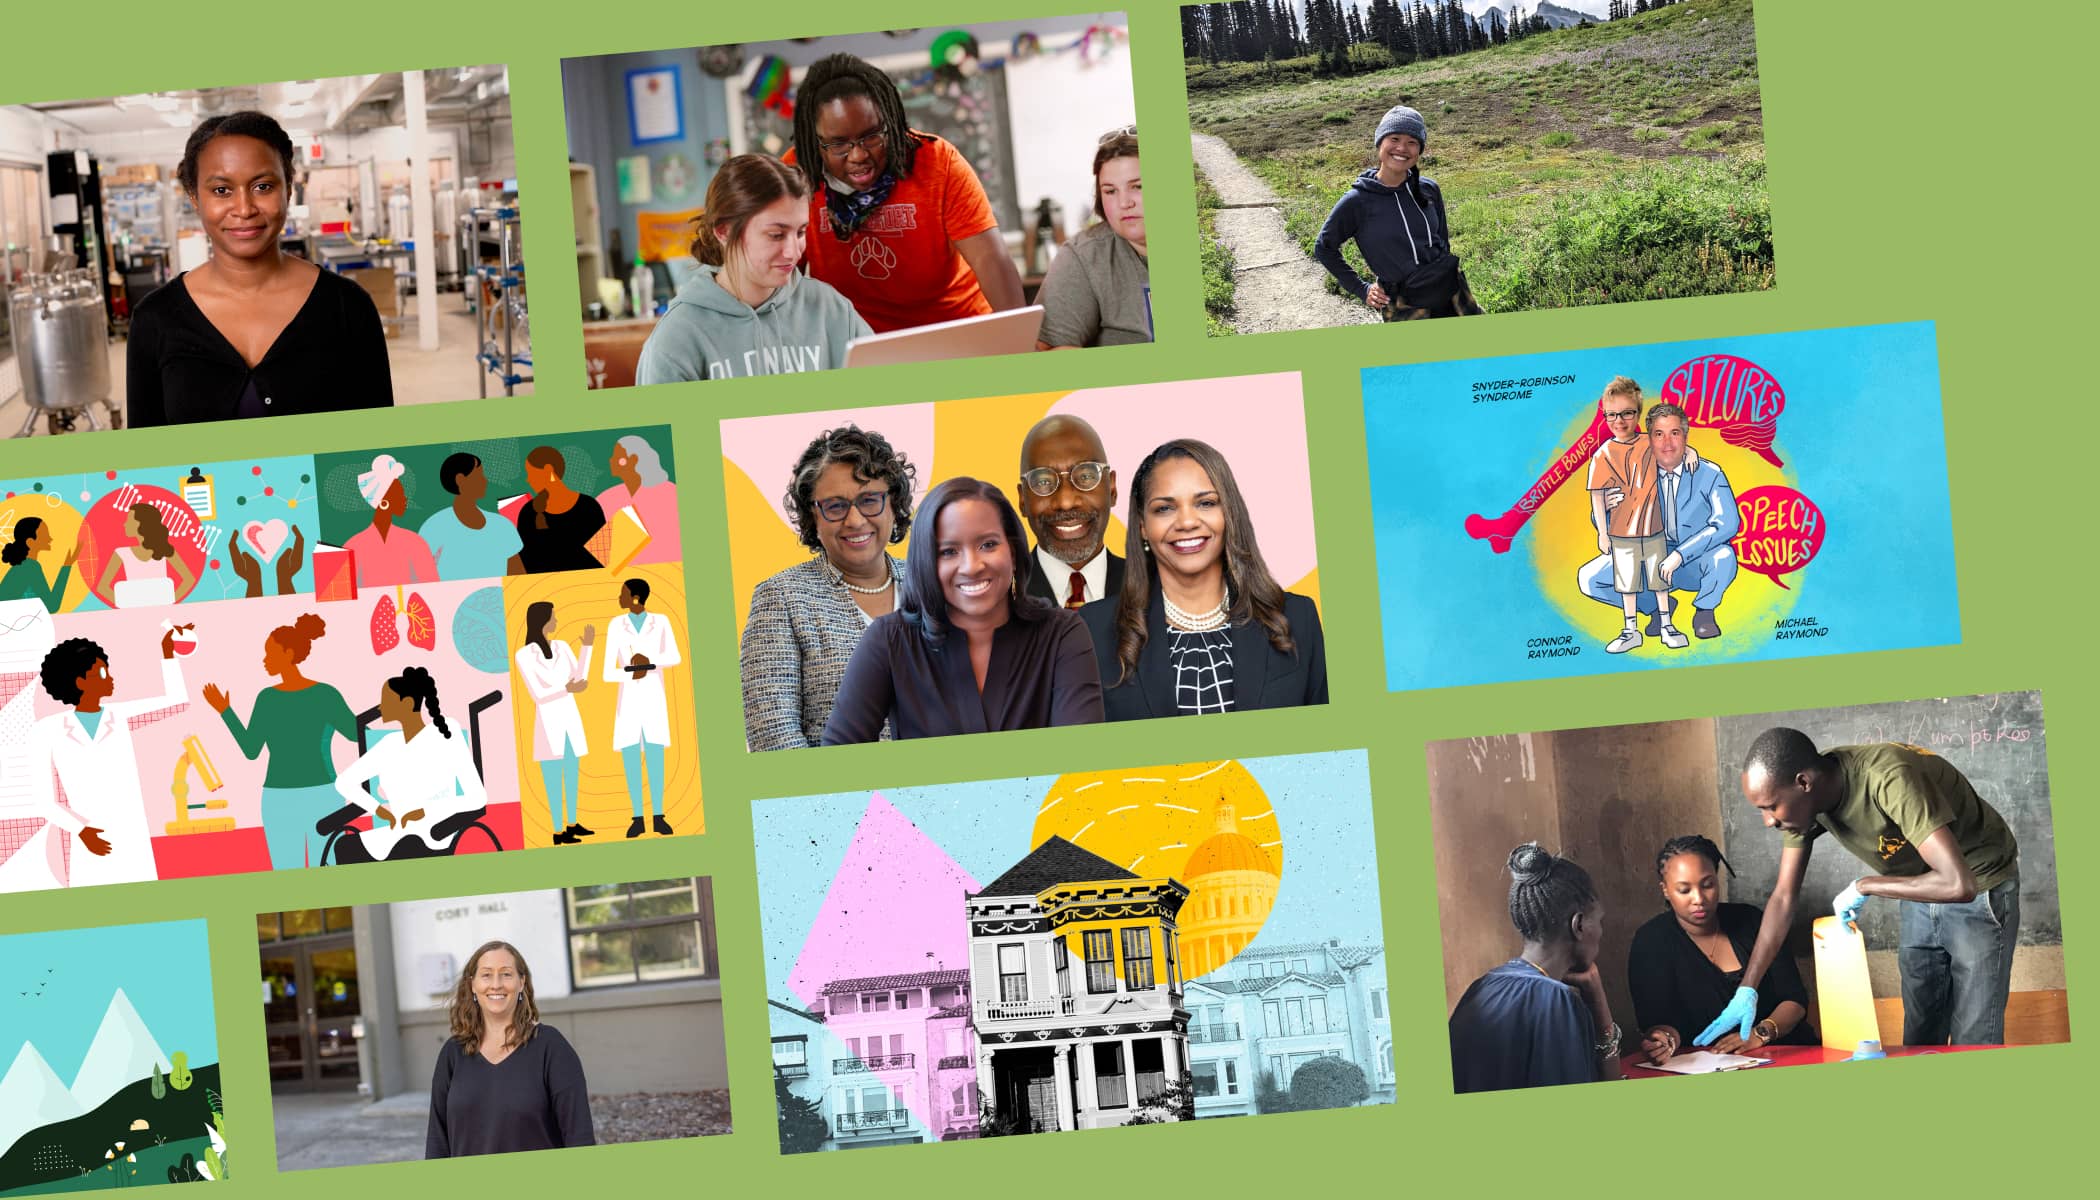 A variety of people and illustrative images compiled on a green background.